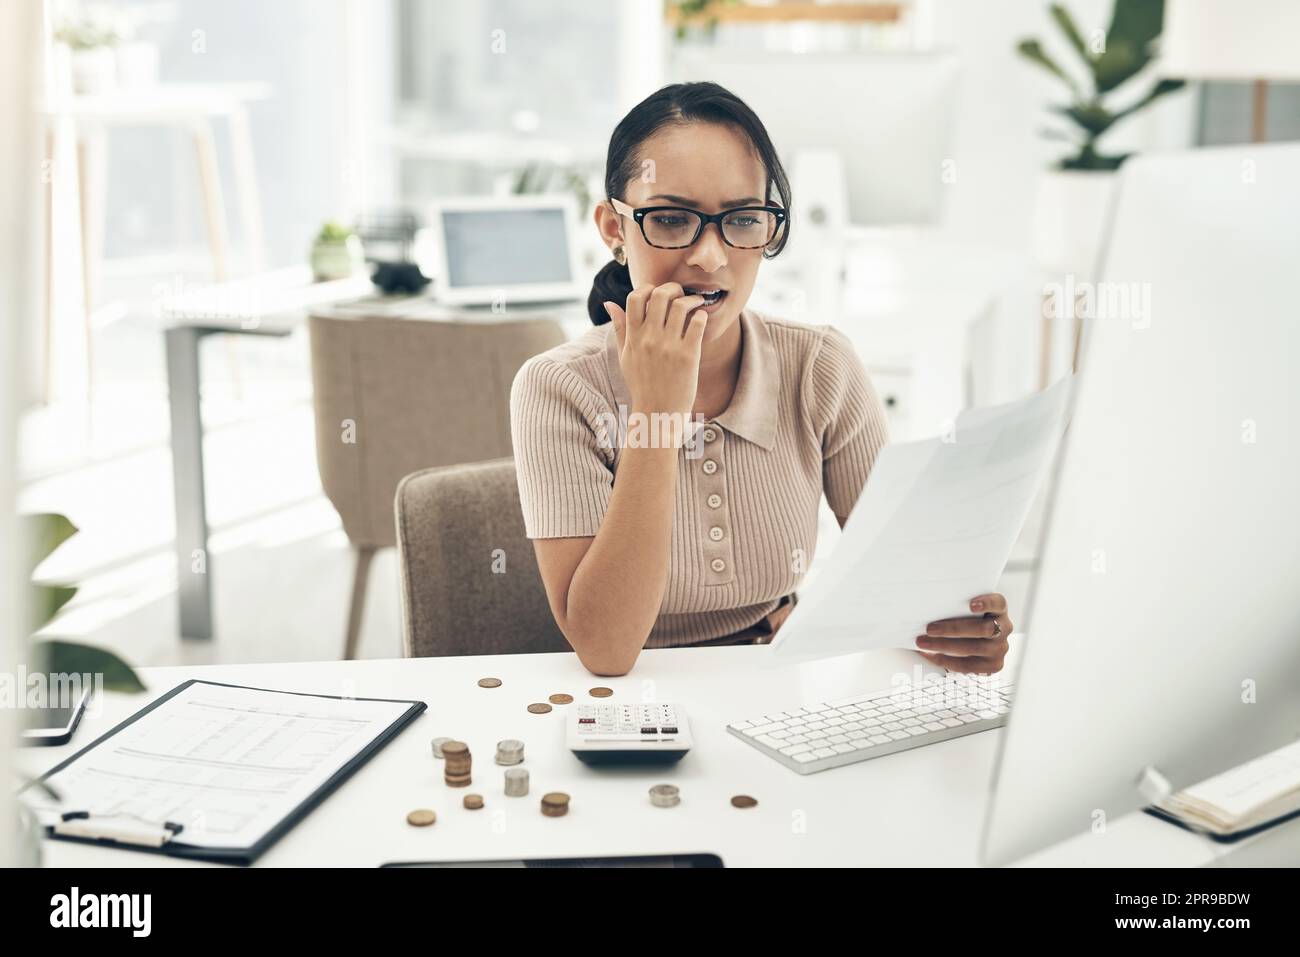 Money matters always stress me out. a young businesswoman looking stressed out while calculating finances in an office. Stock Photo